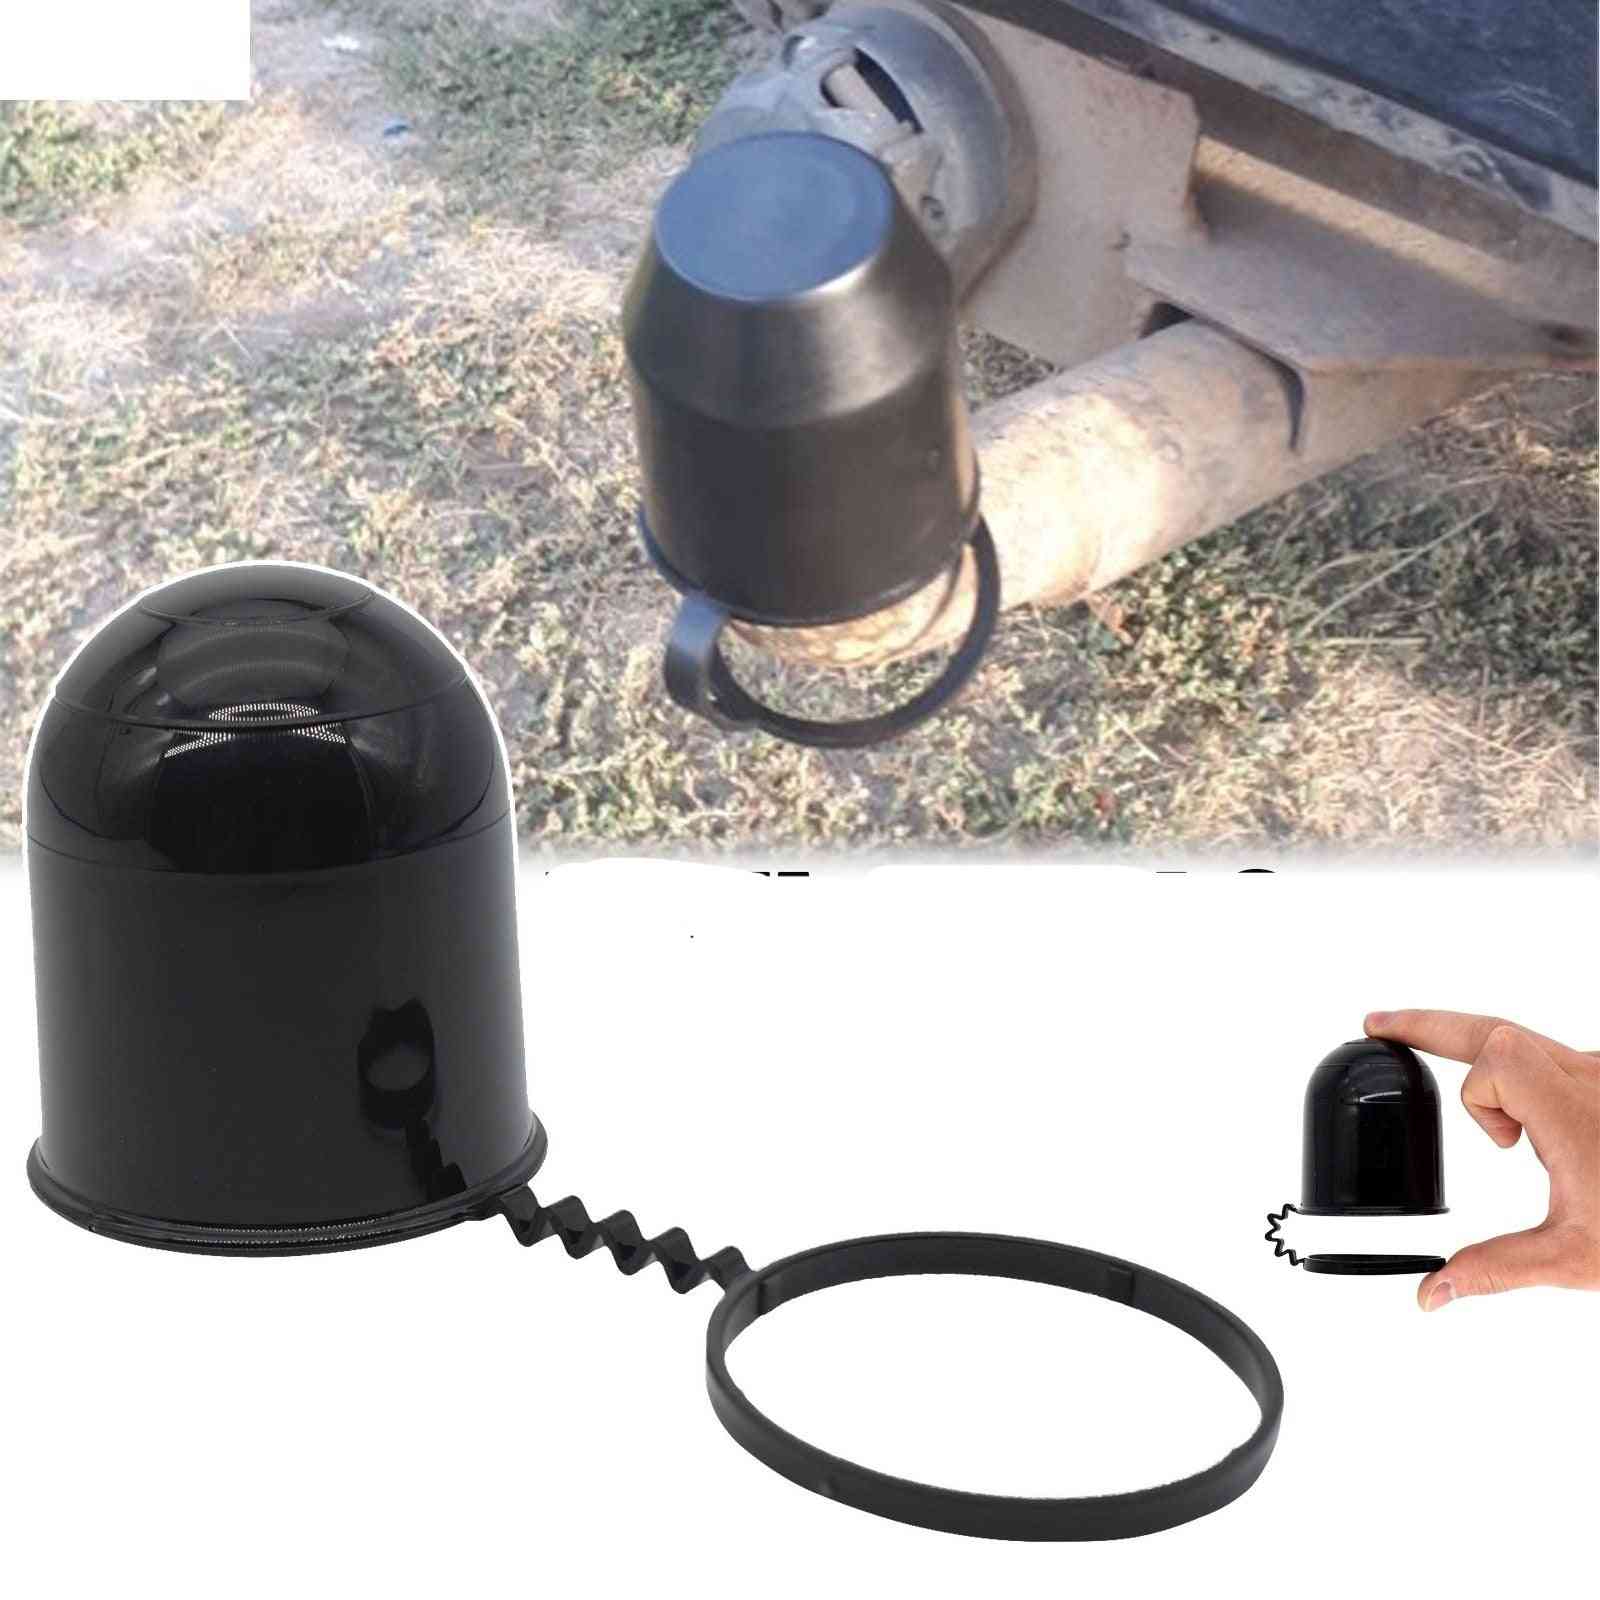 Prevent Falling Towing Hitch Tow Trailer Ball Cap Cover